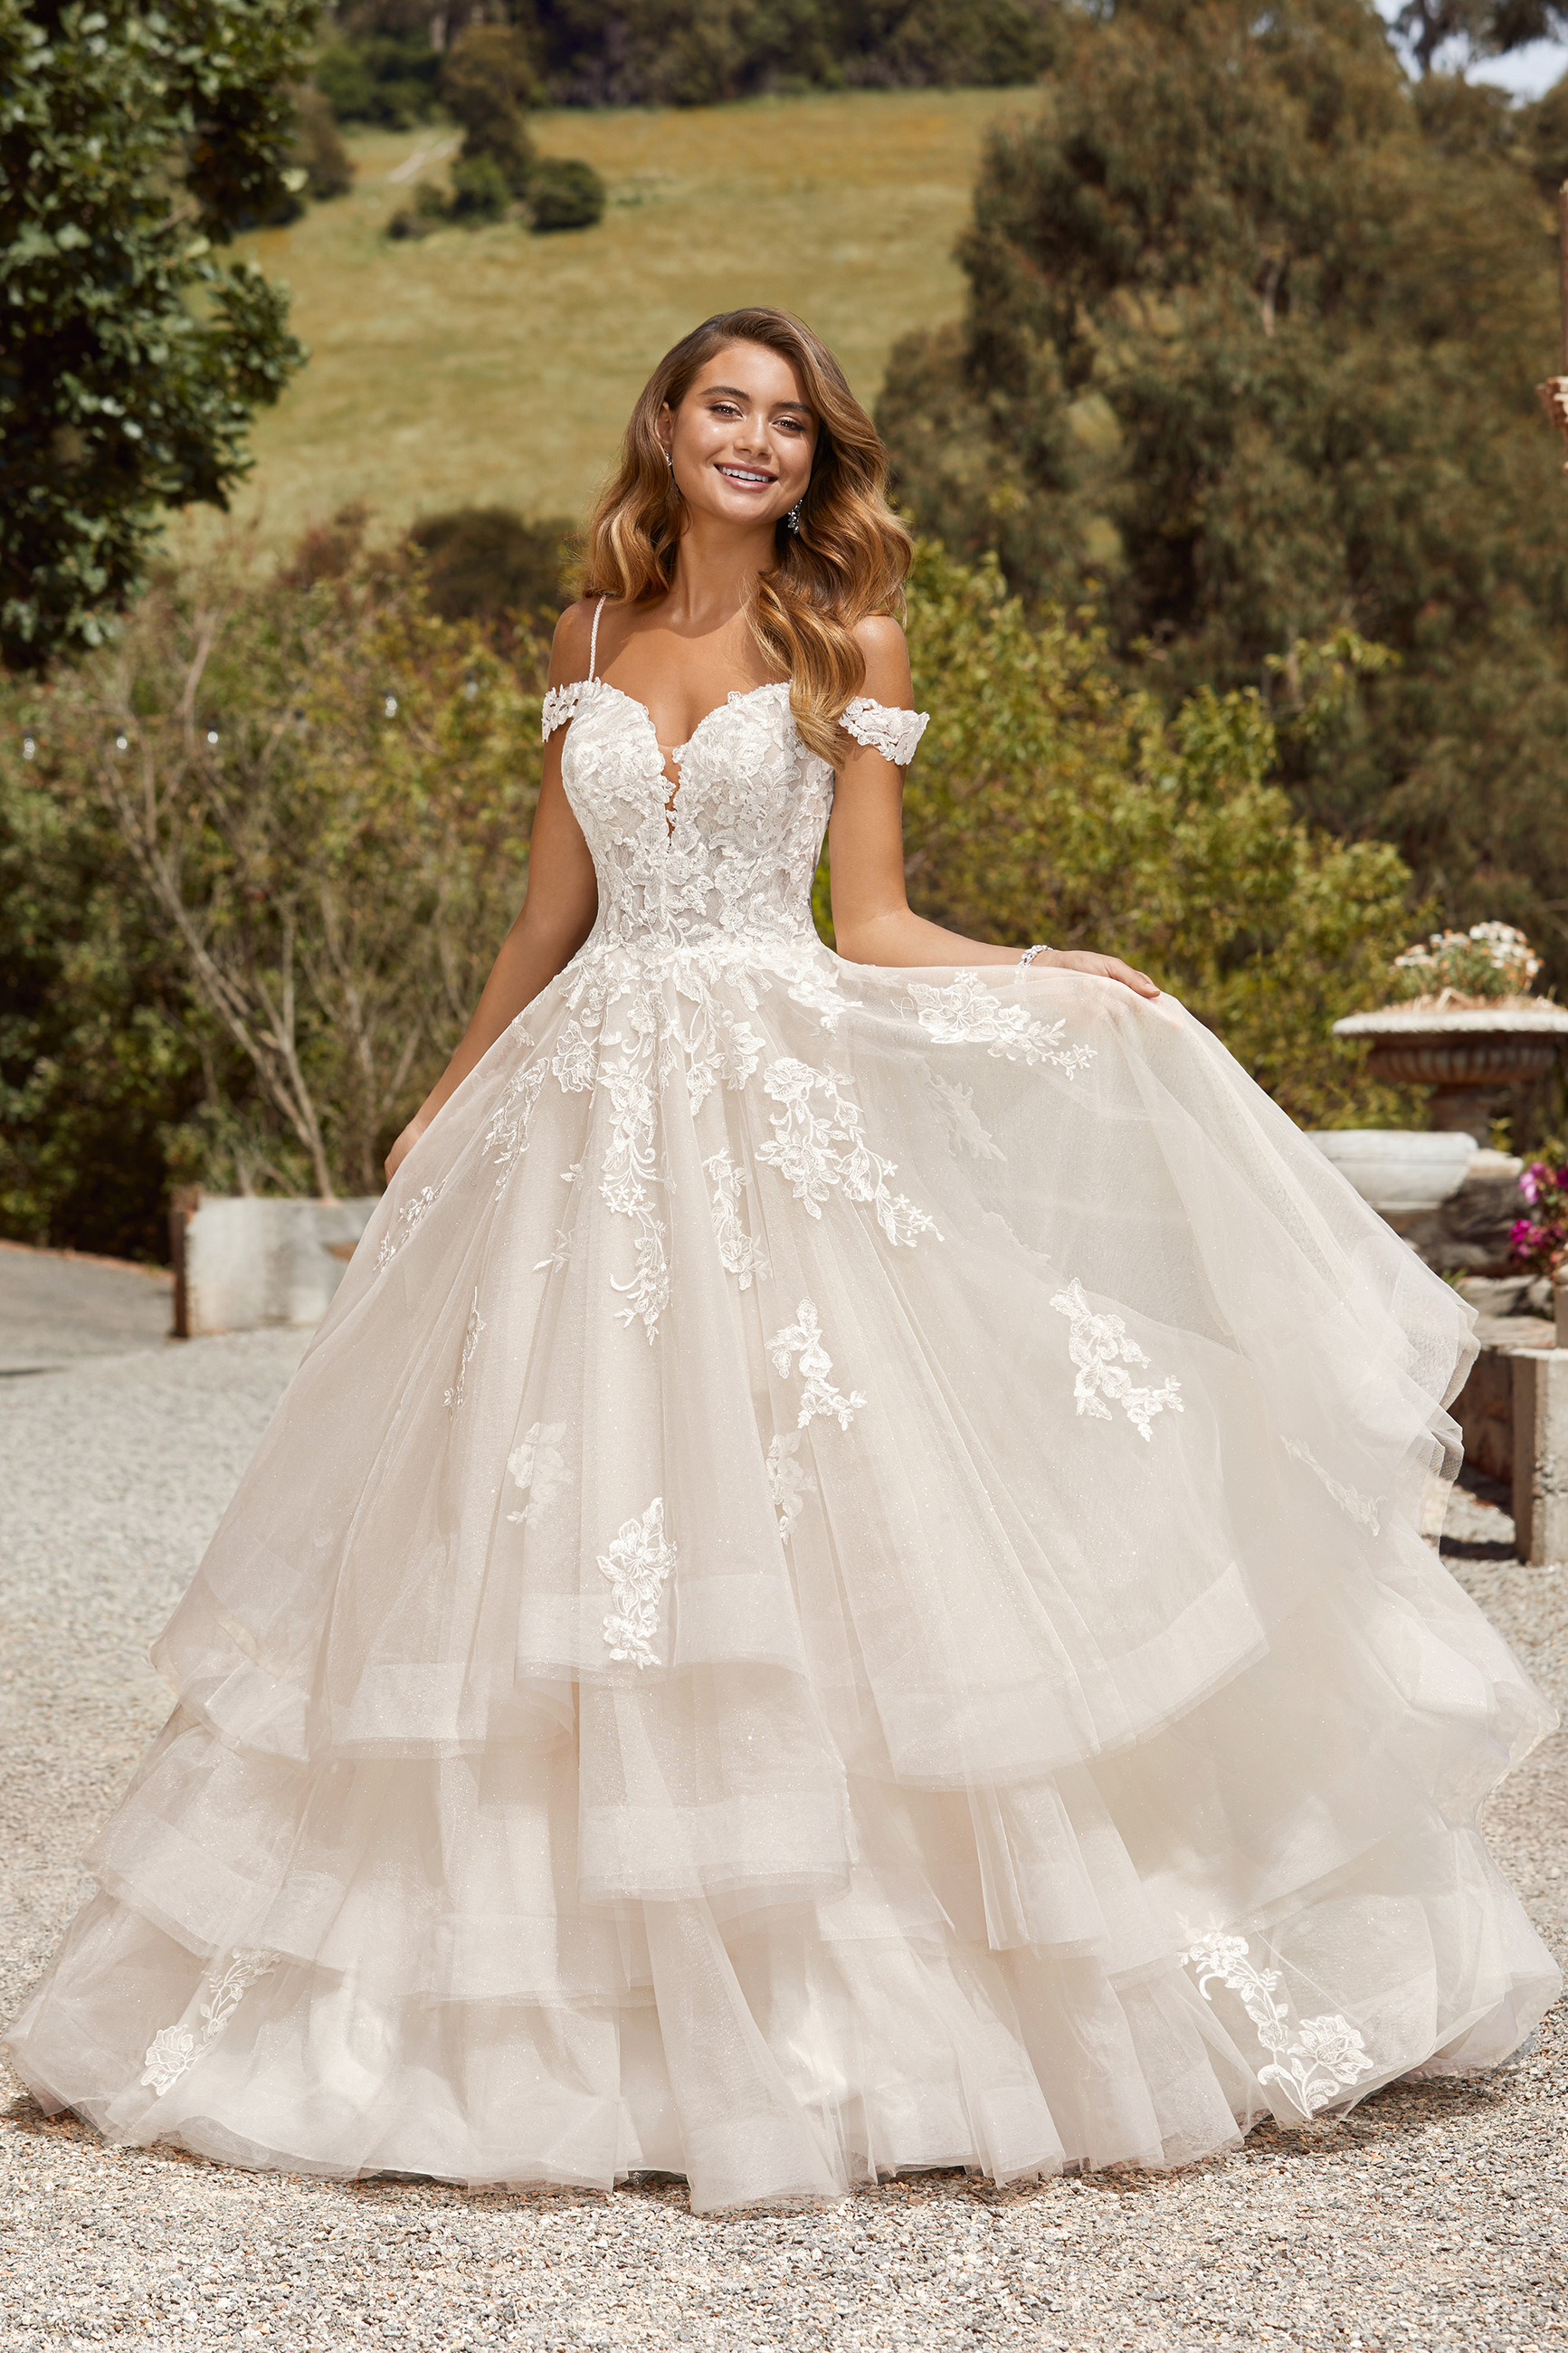 Floral Princess Wedding Dress with Glitter Tulle | Sophia Tolli